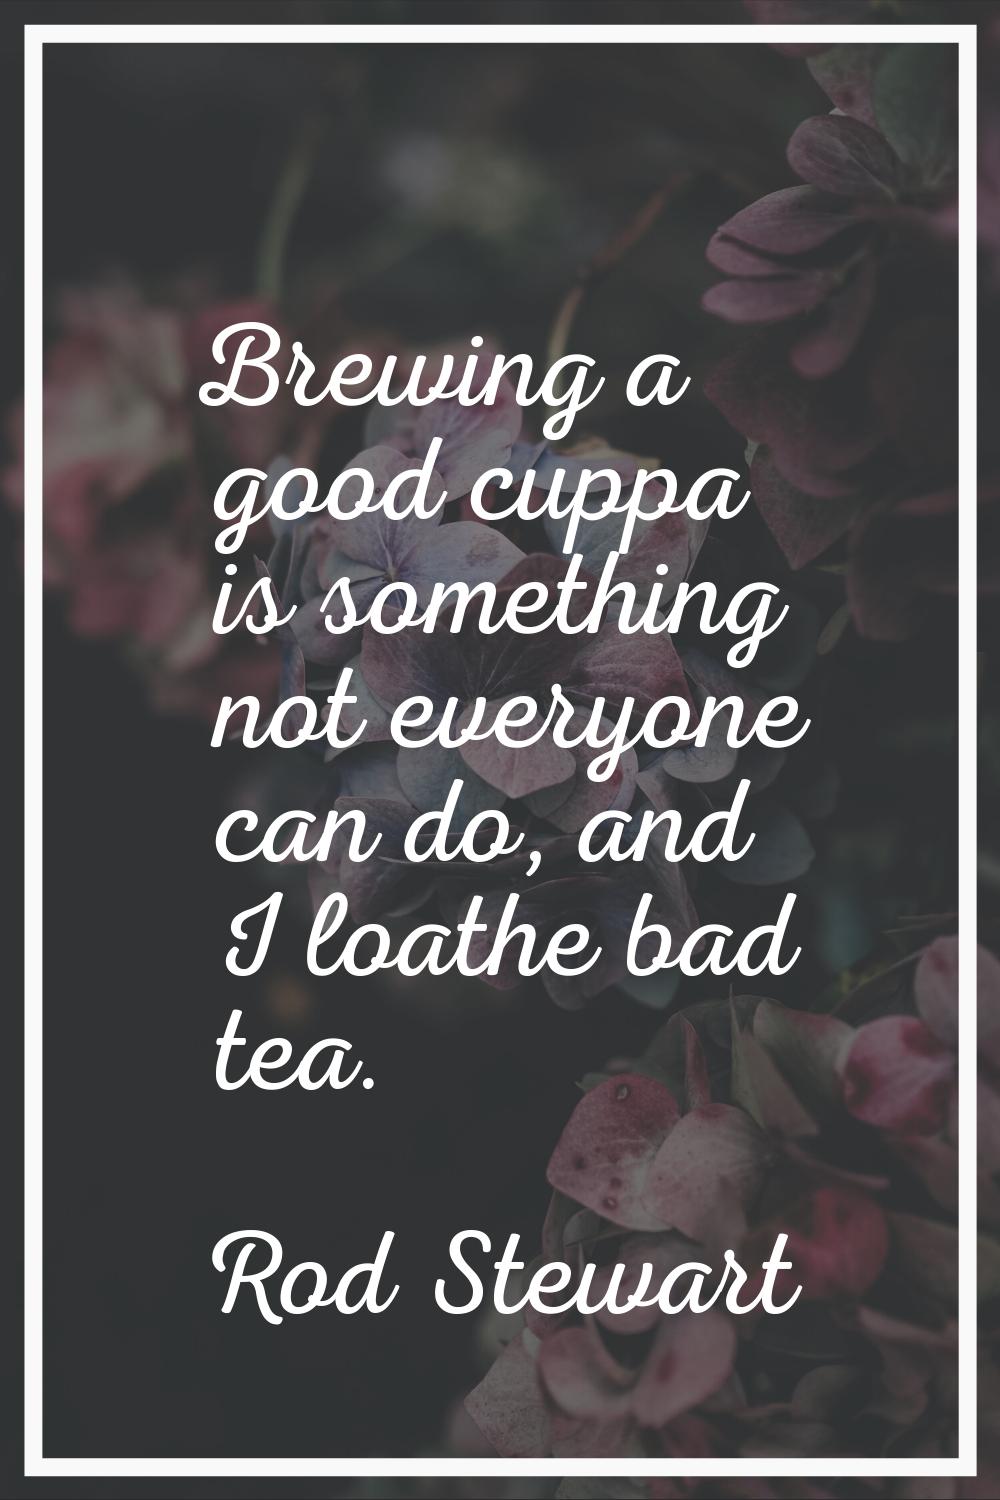 Brewing a good cuppa is something not everyone can do, and I loathe bad tea.